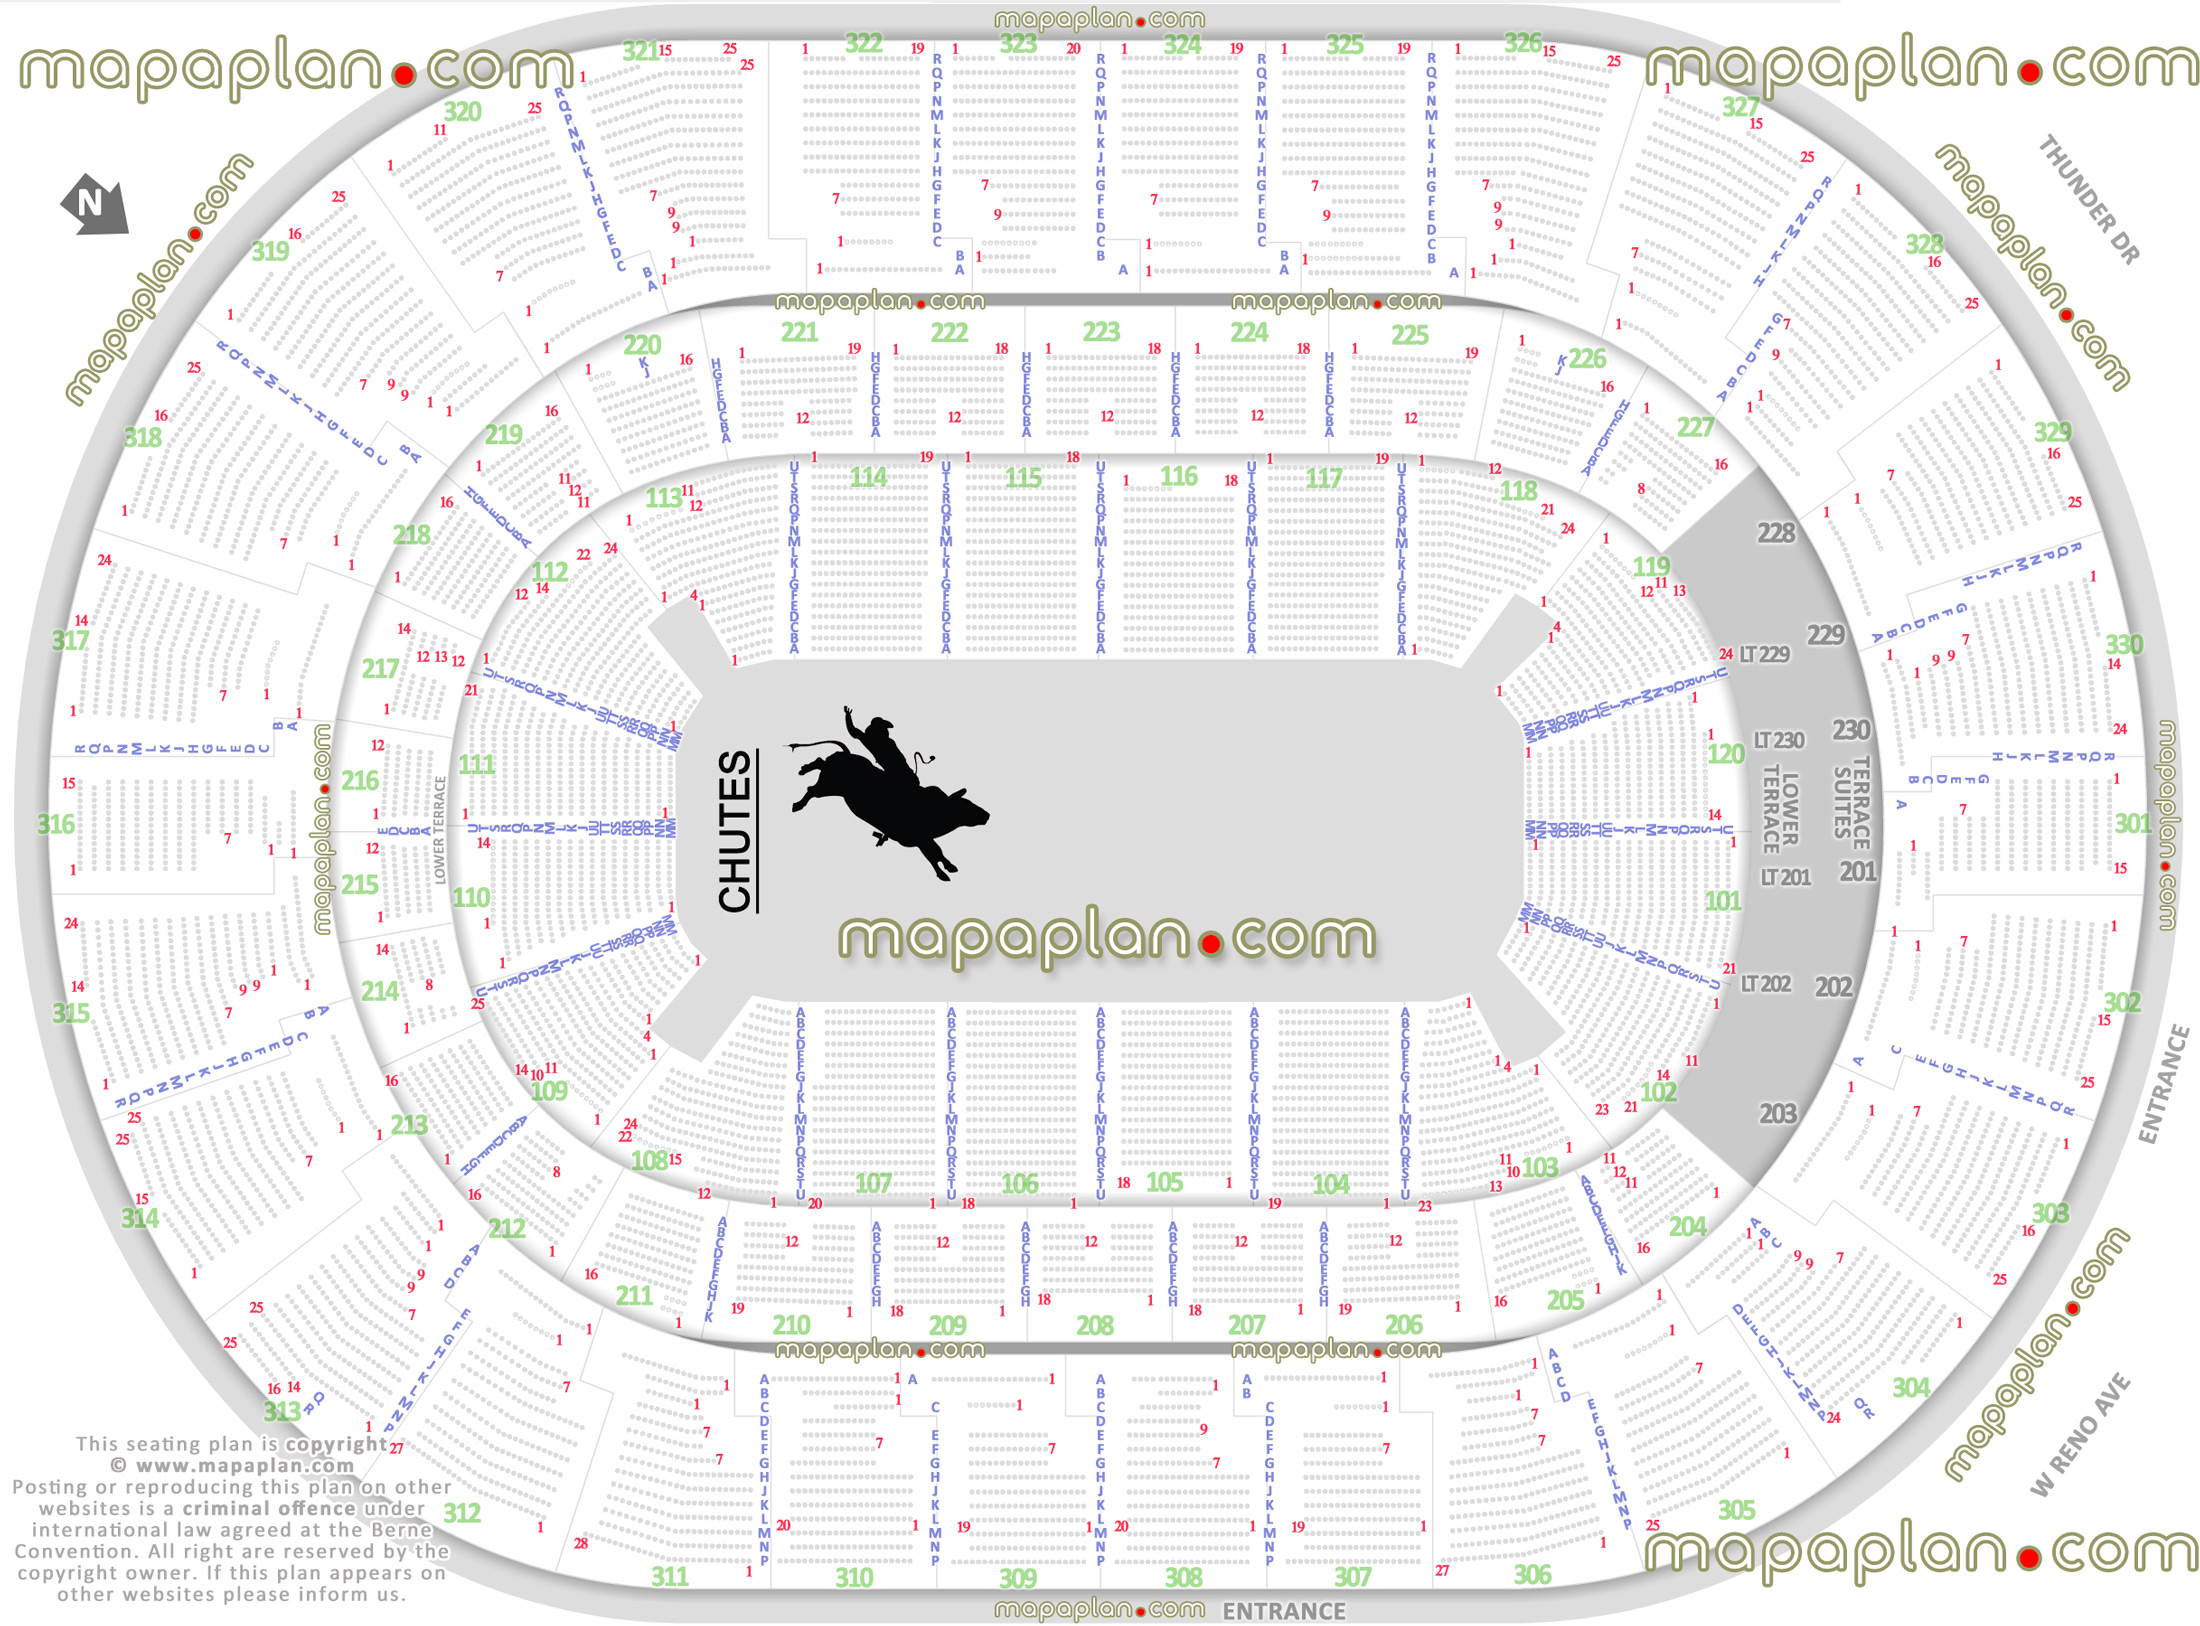 pbr professional bull riders rodeo oklahoma city oklahoma usa detailed seating capacity 3d arrangement arena row numbers layout lower club upper level main entrance gate exits map west east south north detailed fully seated chart setup standing room only sro areas wheelchair disabled handicap accessible seats plan Oklahoma City Chesapeake Energy Arena seating chart